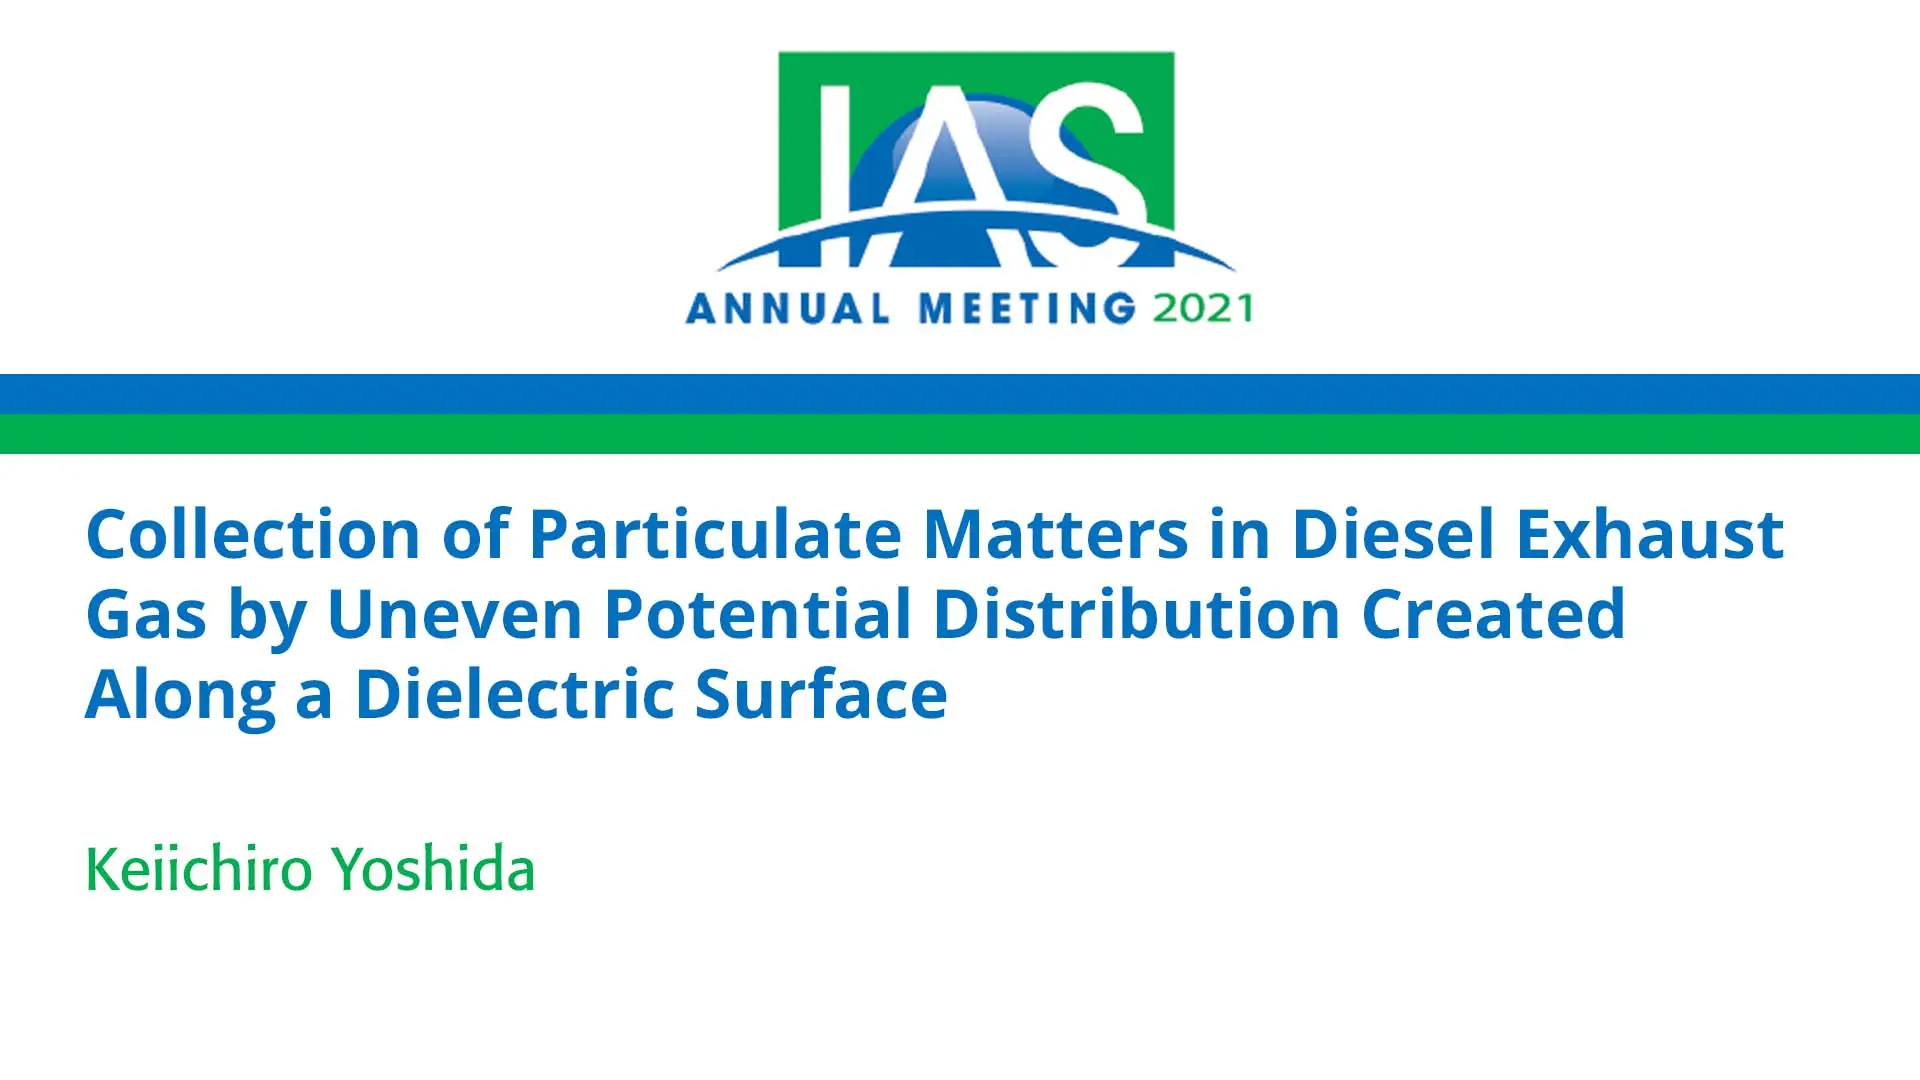 Collection of Particulate Matters in Diesel Exhaust Gas by Uneven Potential Distribution Created Along a Dielectric Surface